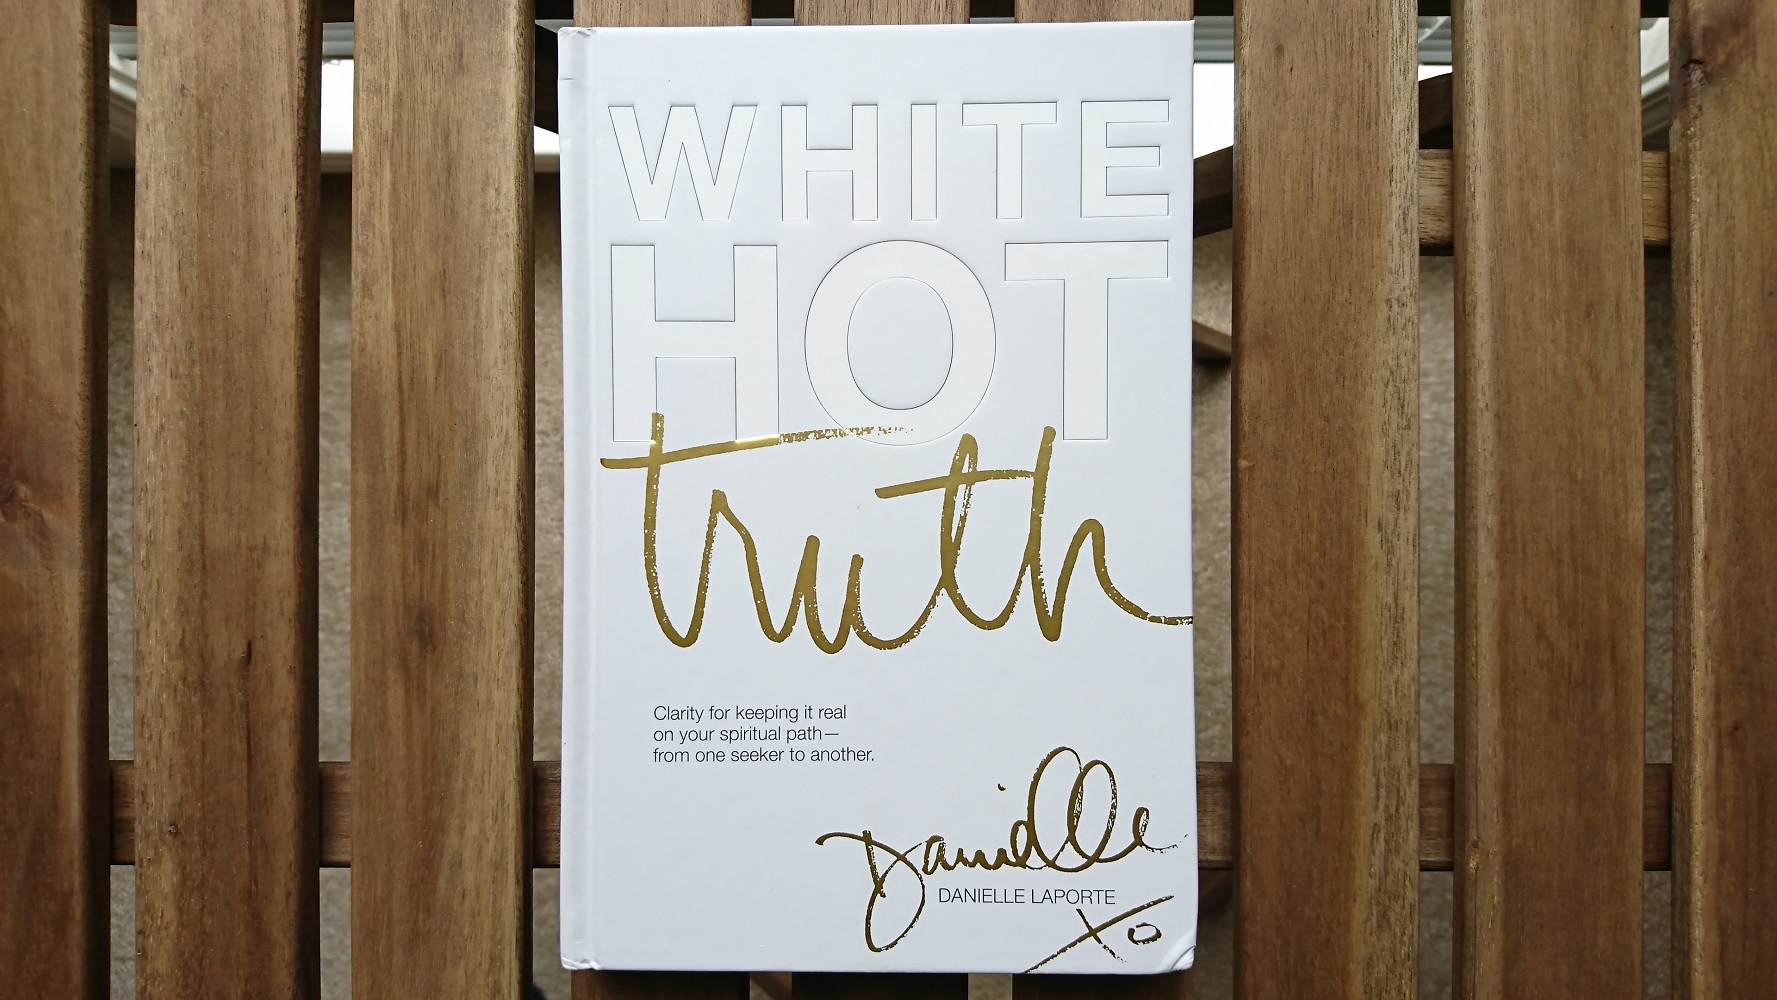 photo of the book White Hot Truth by Danielle LaPorte with an all white cover and the first 2 words of the title embossed and the 3rd word of the title in gold.